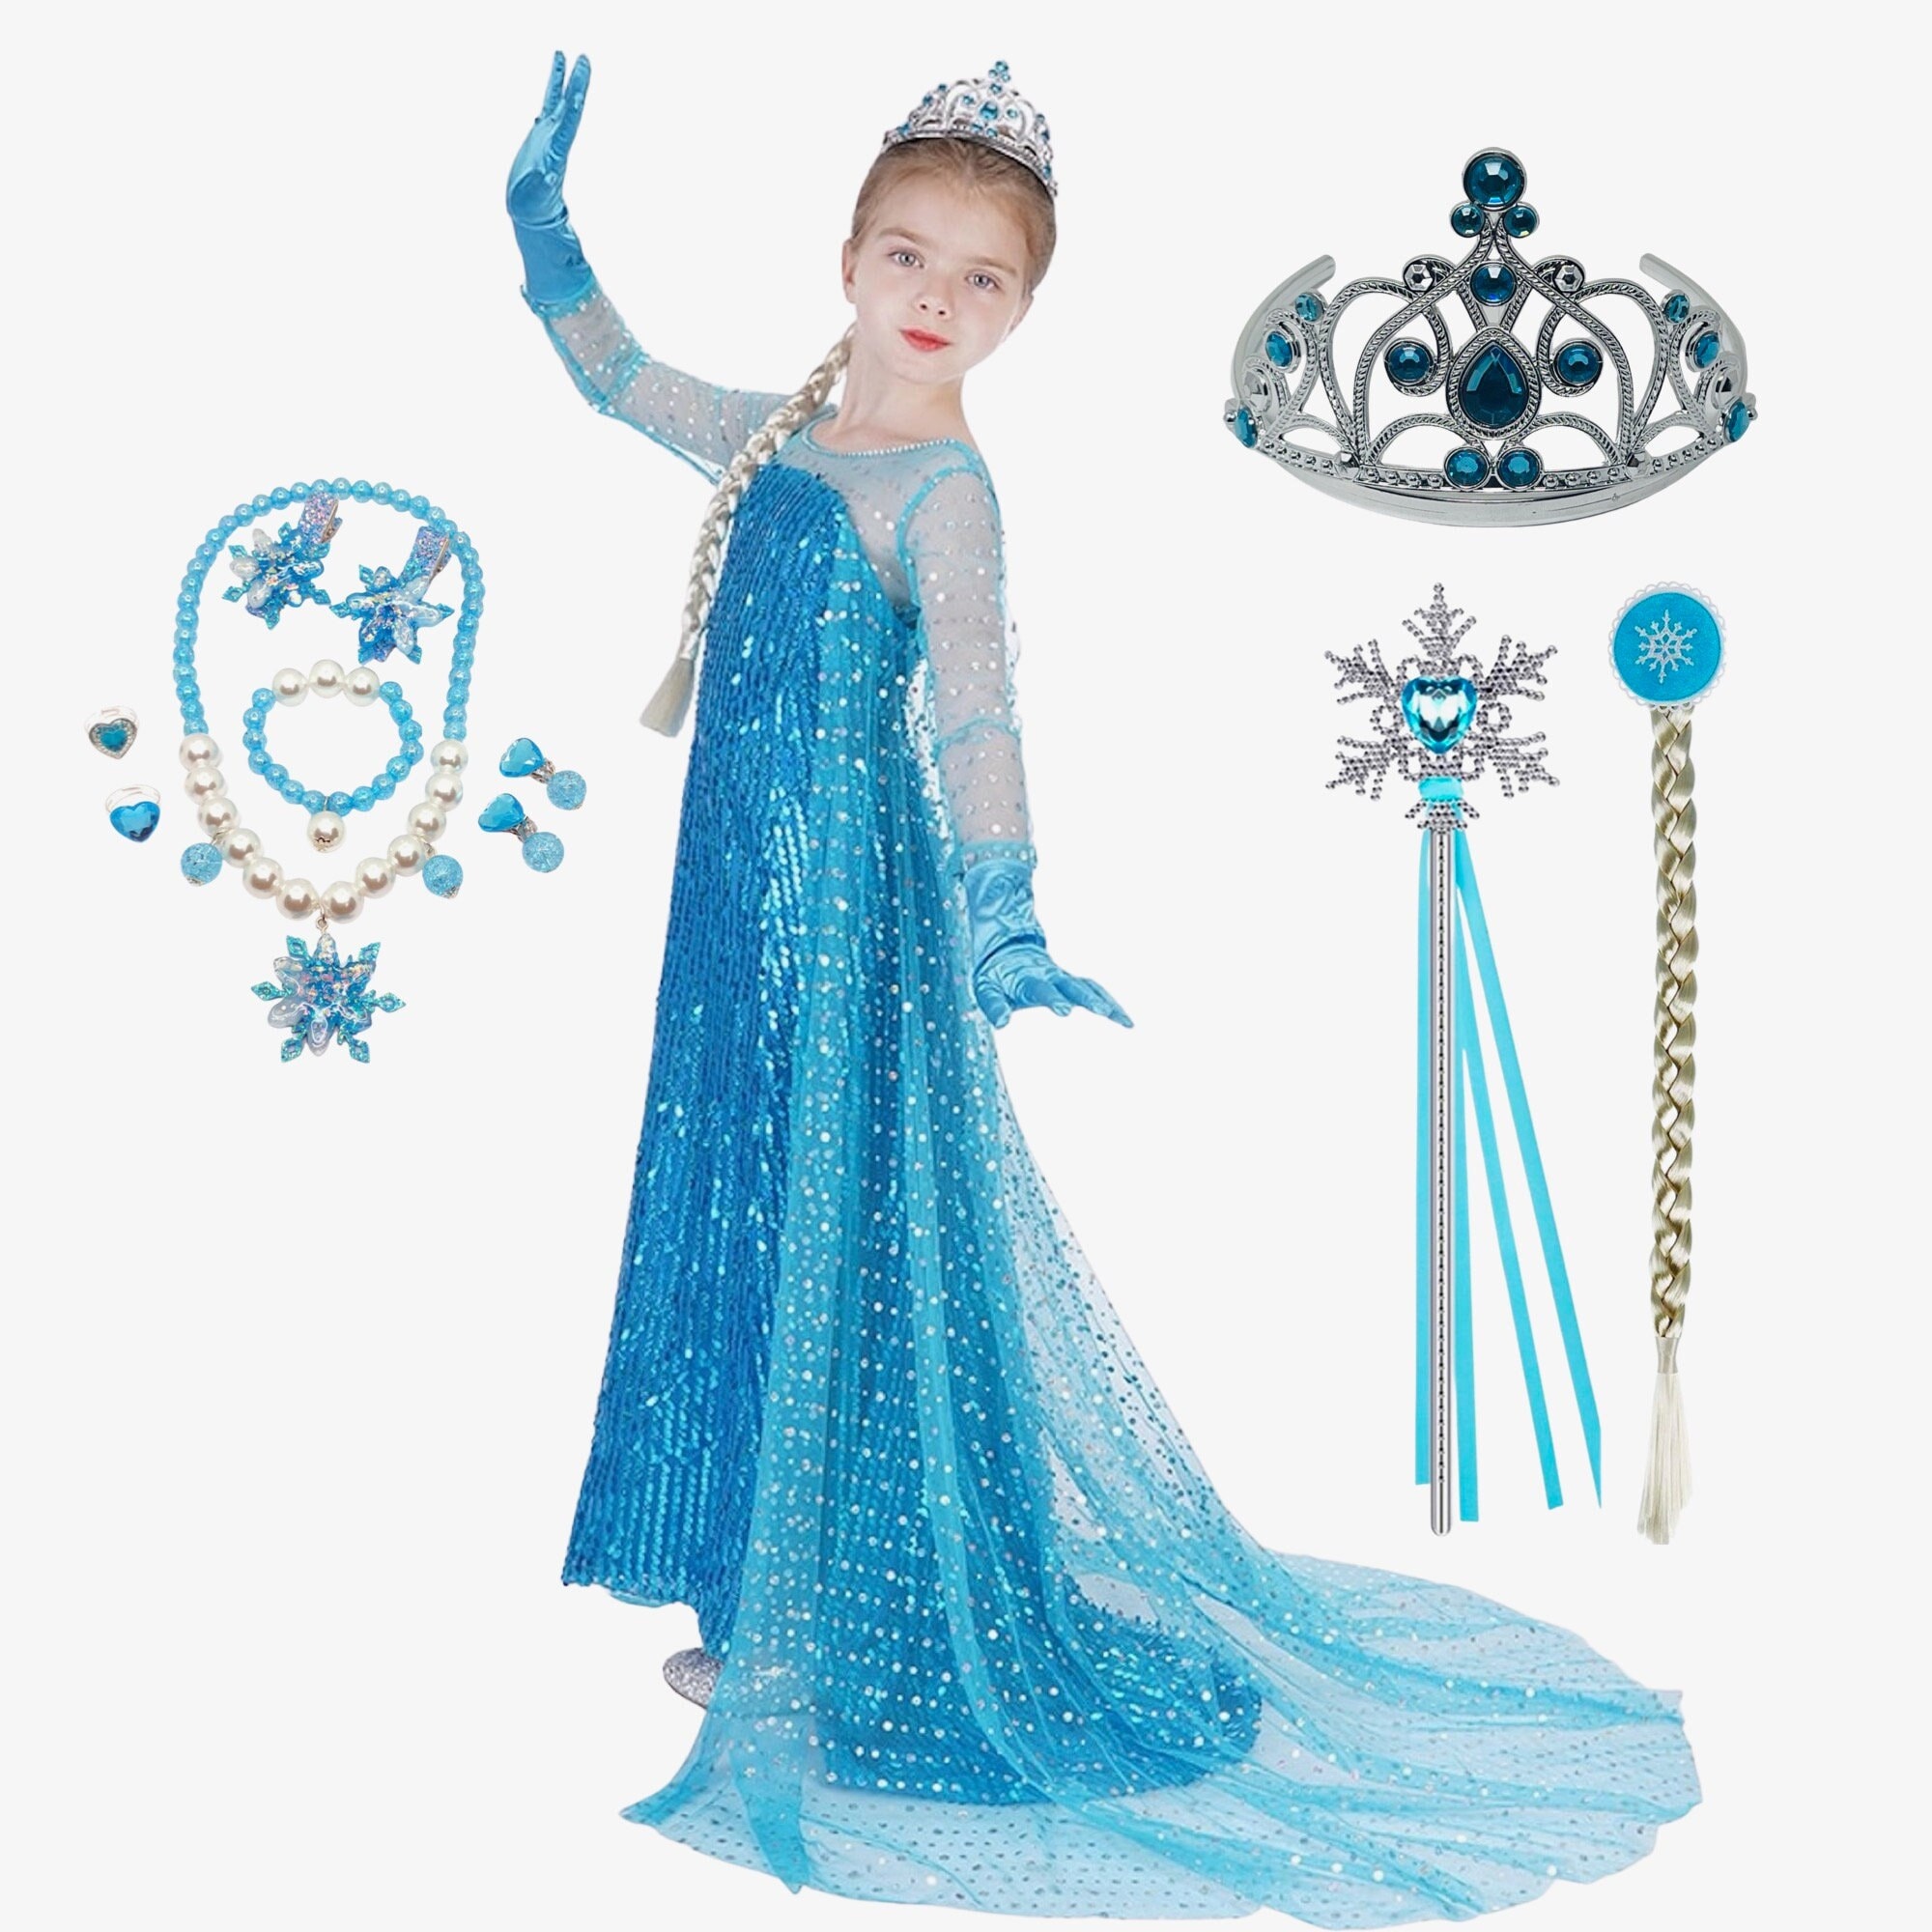 Beautiful sparkly Elsa inspired dress from www.facebook.co… | Flickr